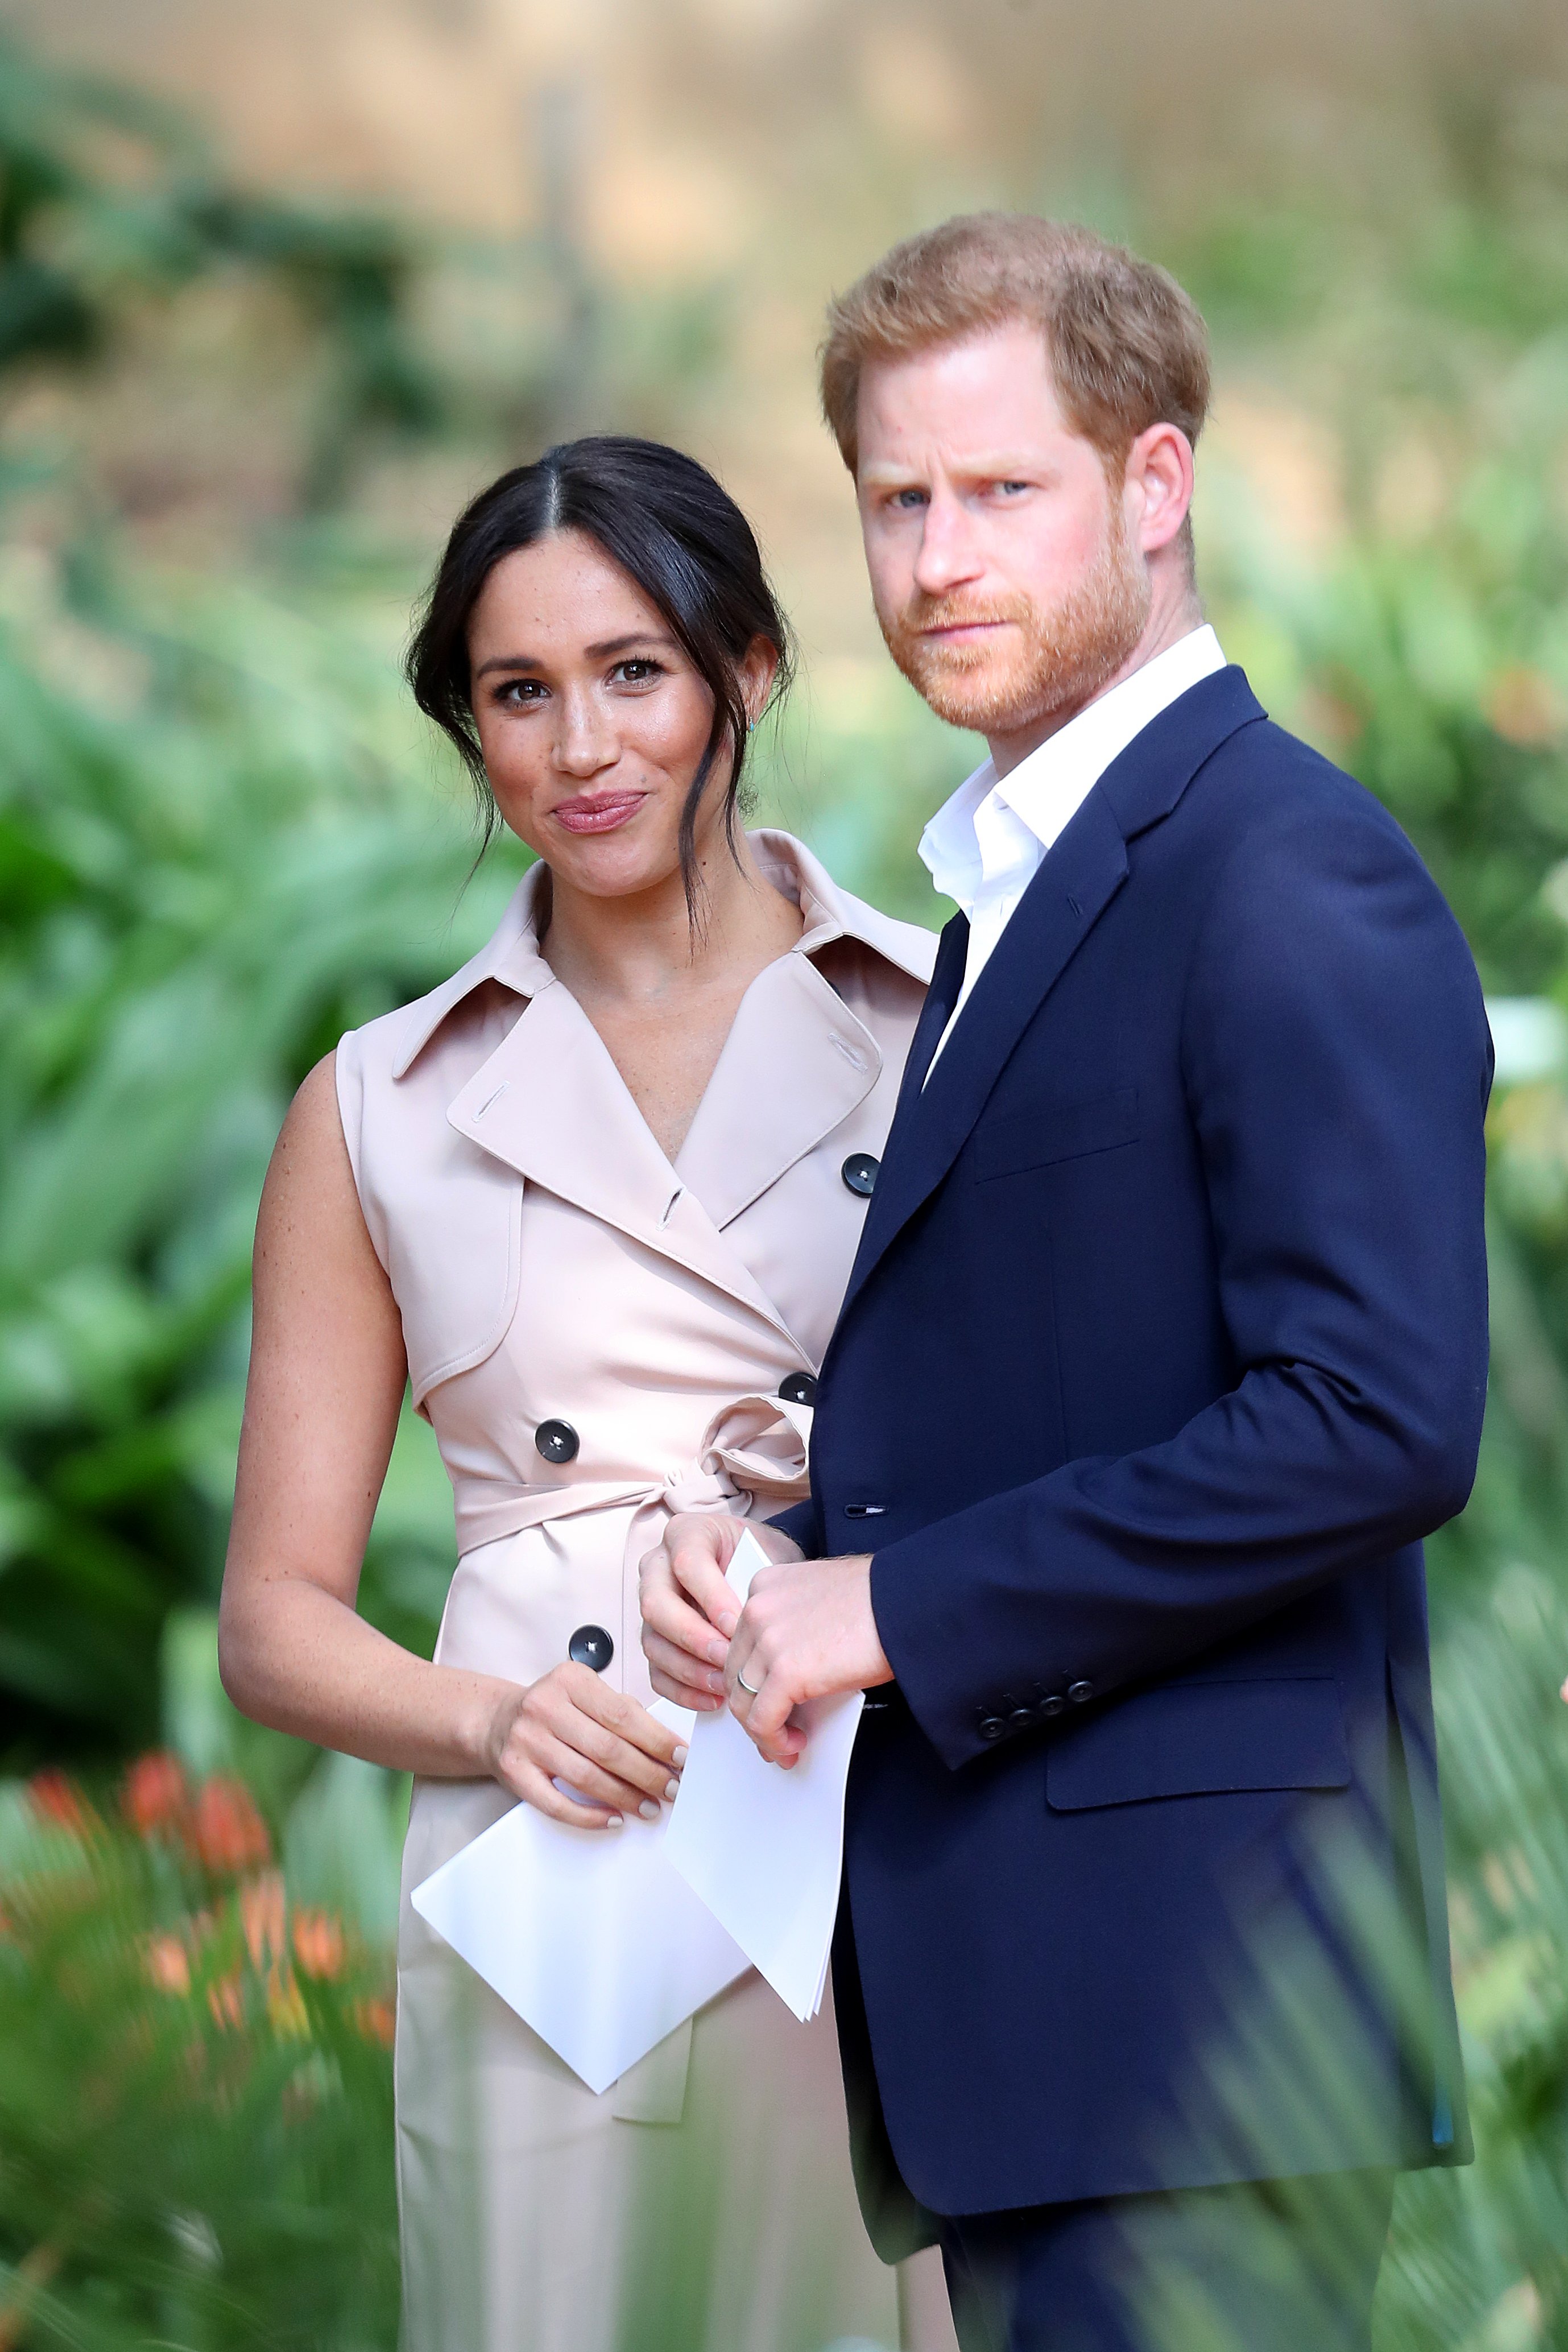 Prince Harry and Meghan Markle attend a Creative Industries and Business Reception on October 02, 2019, in Johannesburg, South Africa. | Source: Getty Images